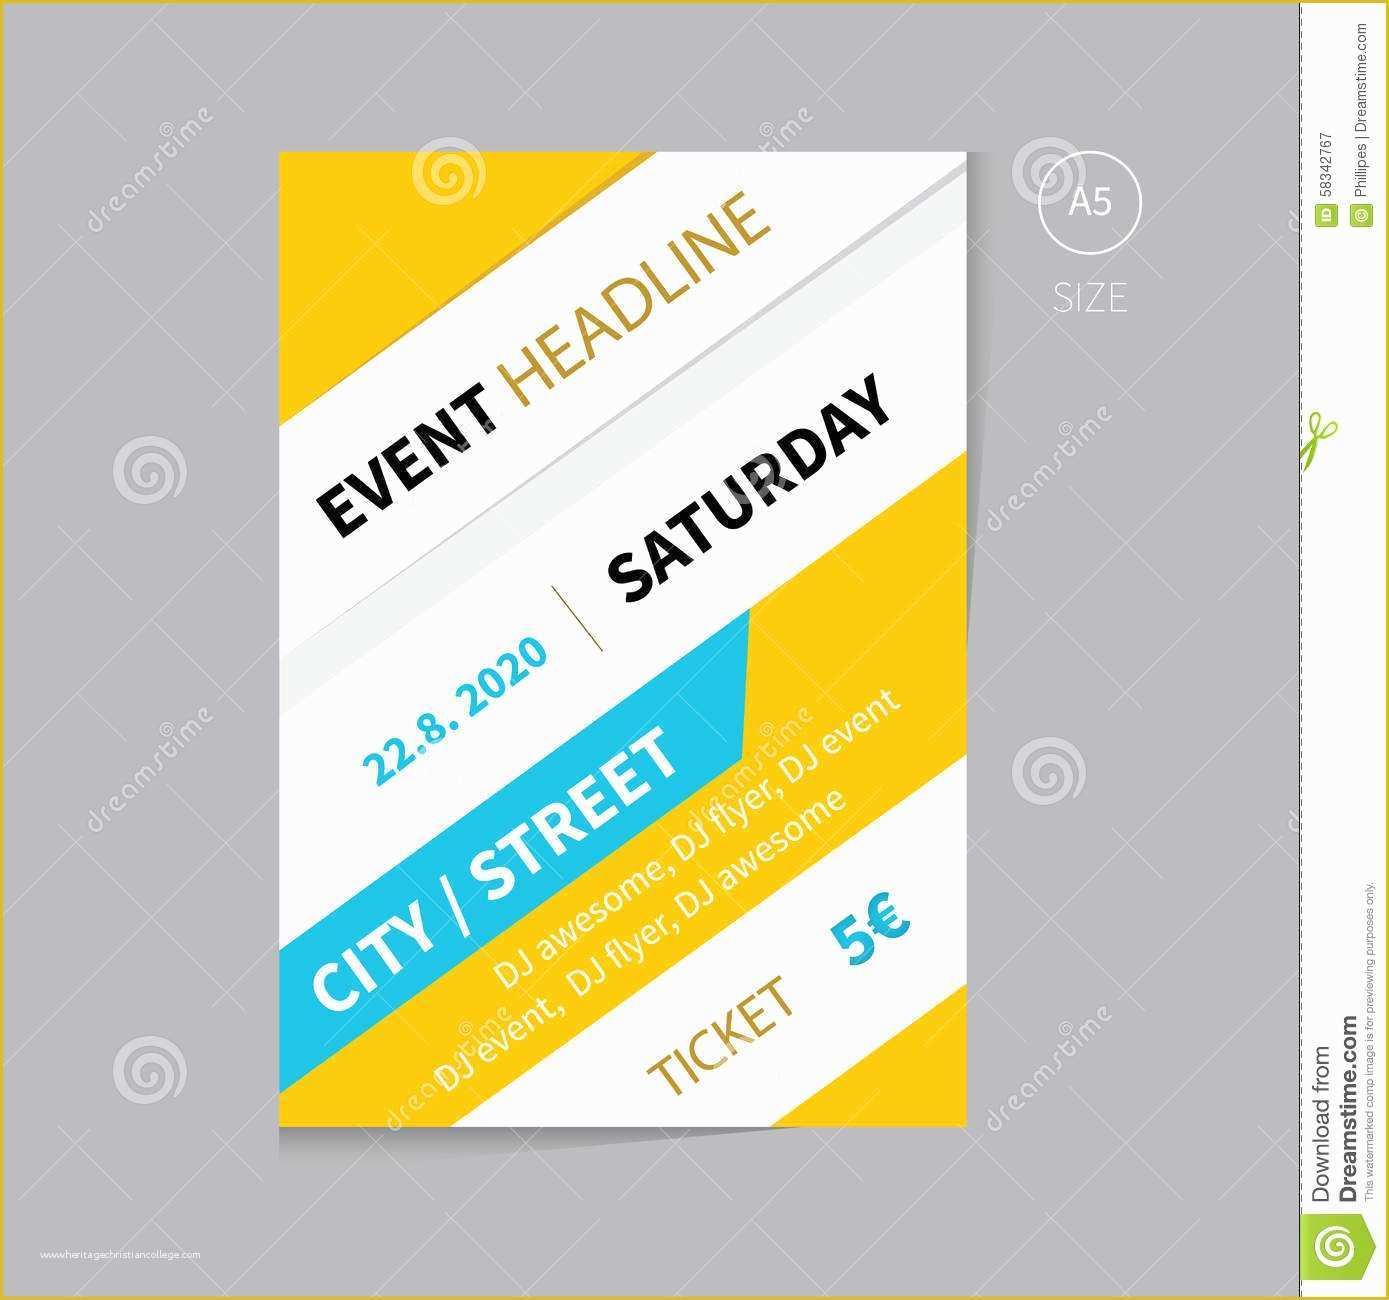 Business event Flyer Templates Free Of Vector event Brochure Flyer Template Design A5 Size Stock